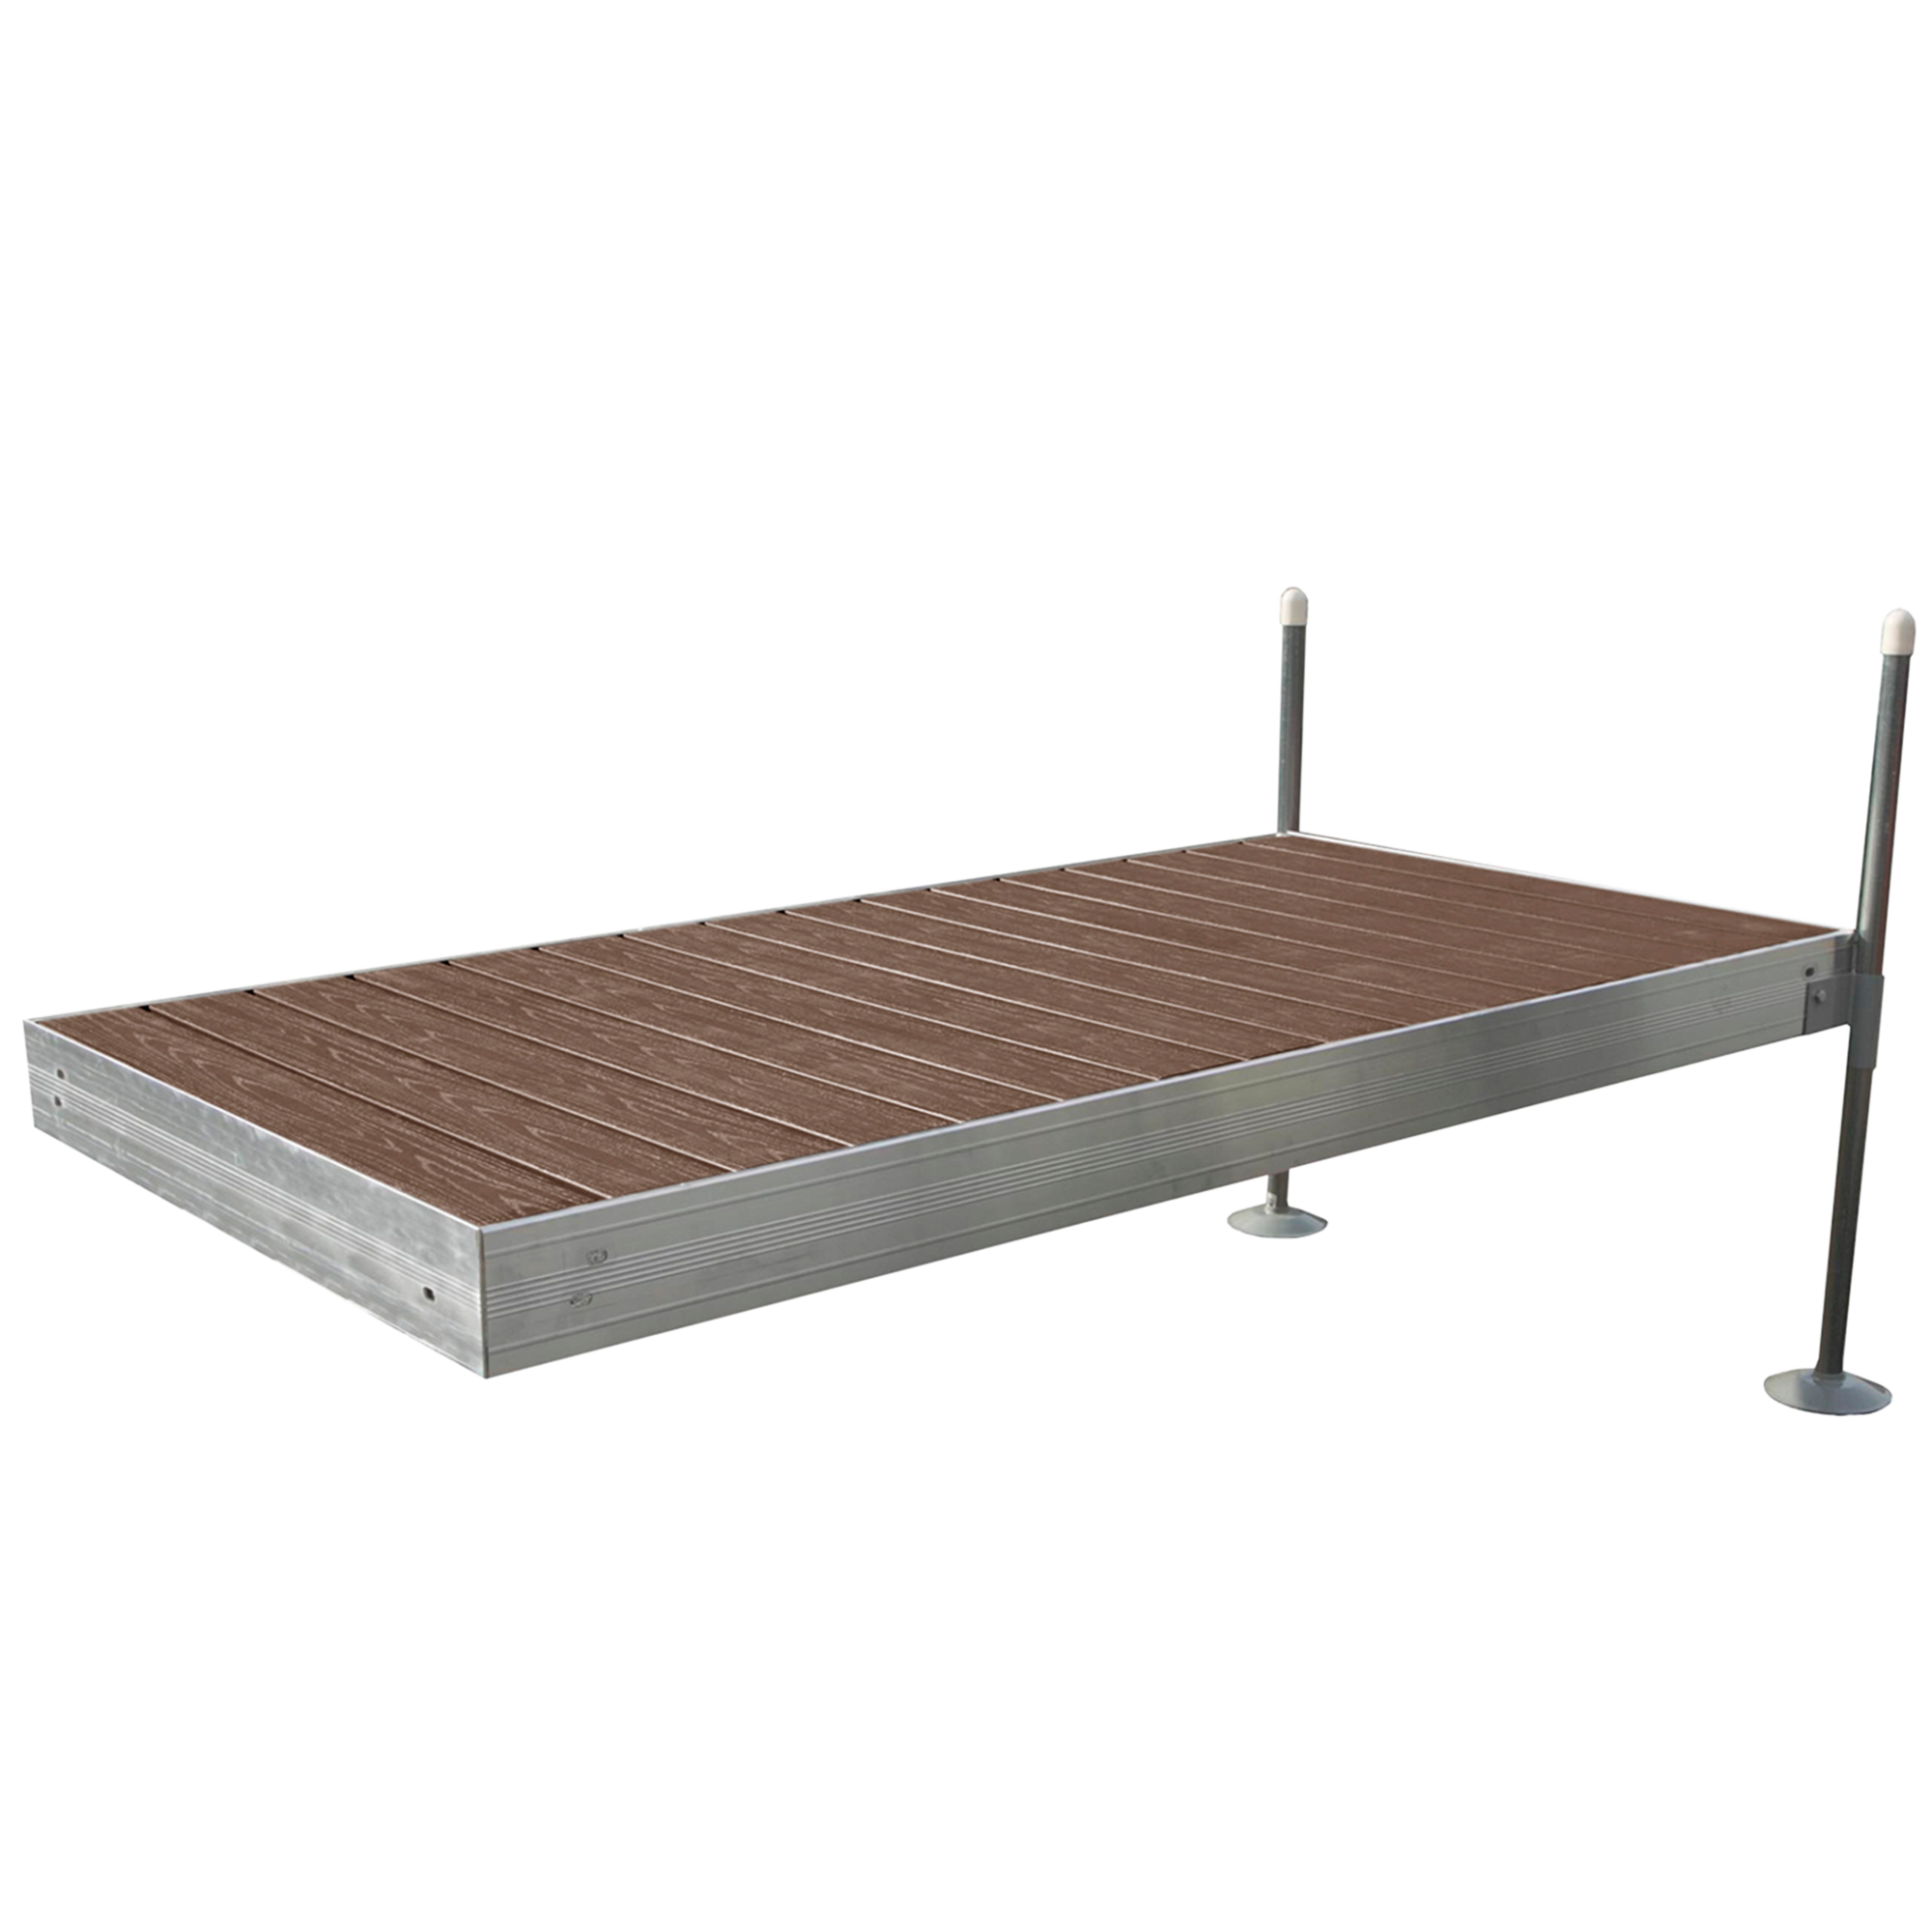 8' Straight Boat Dock System with Aluminum Frame and Brown Composite Decking